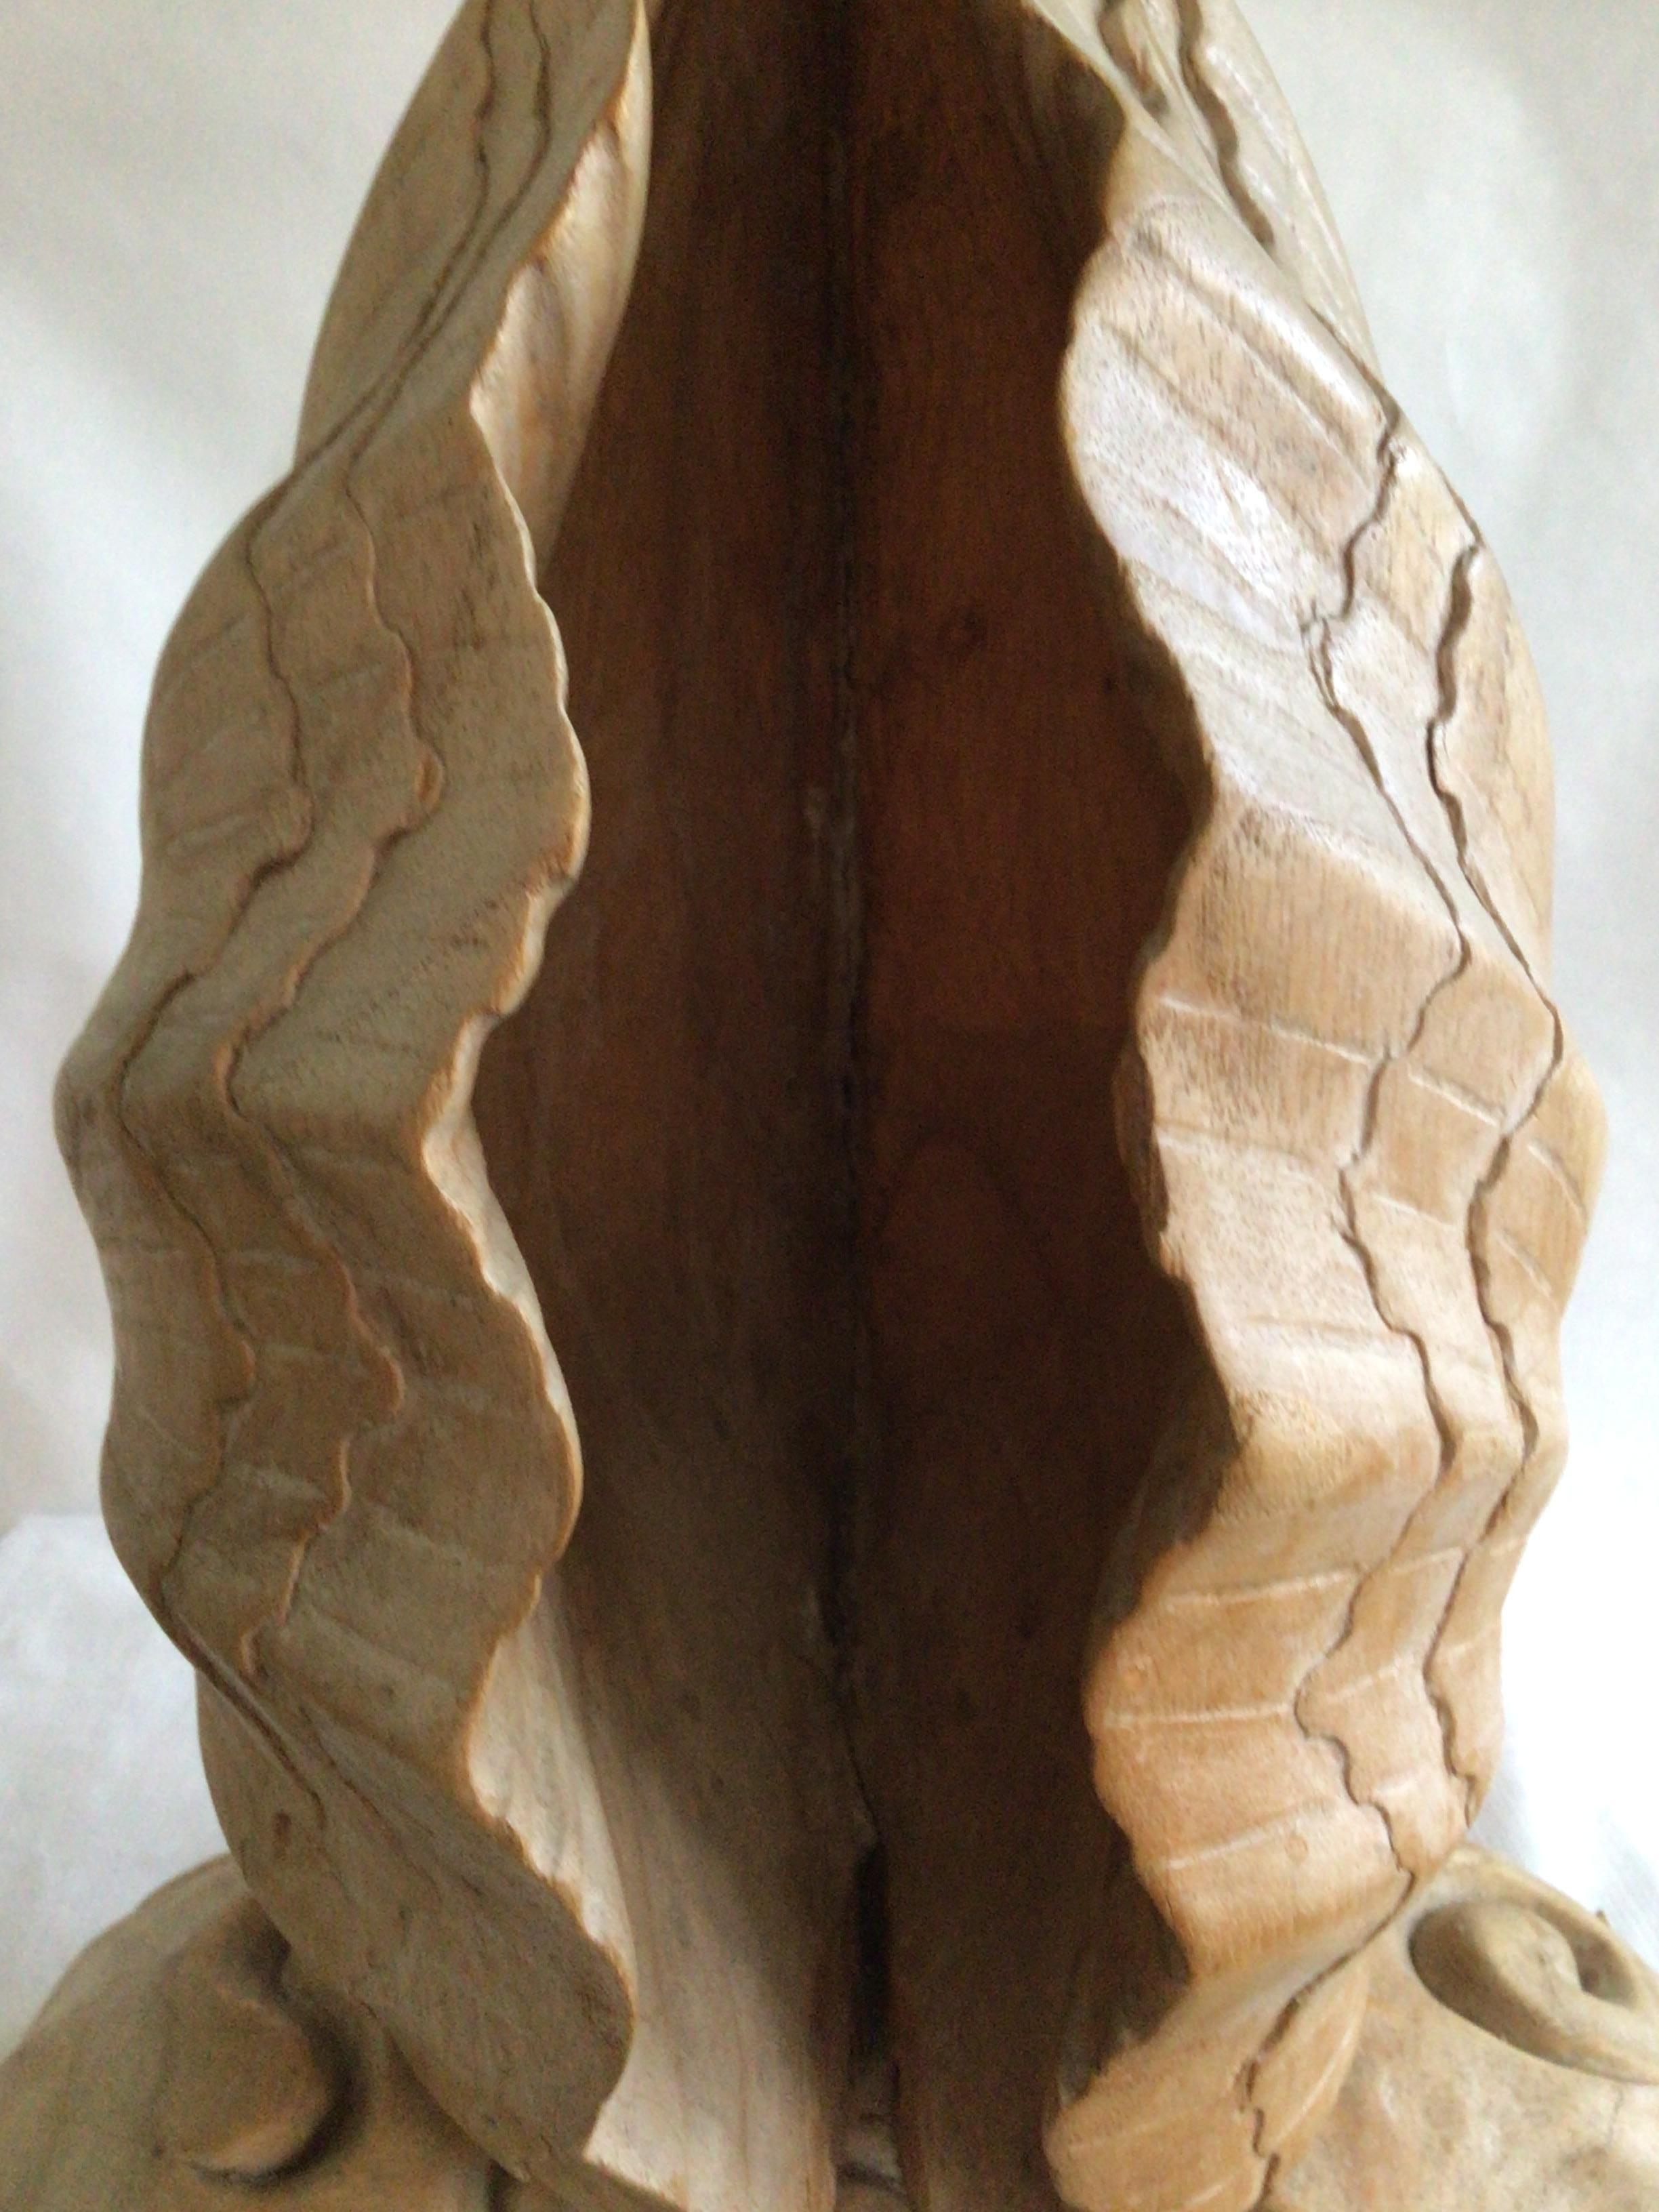 Mid-20th Century 1950s Italian Carved Wood Folded Leaf Sculpture on Wood Base For Sale